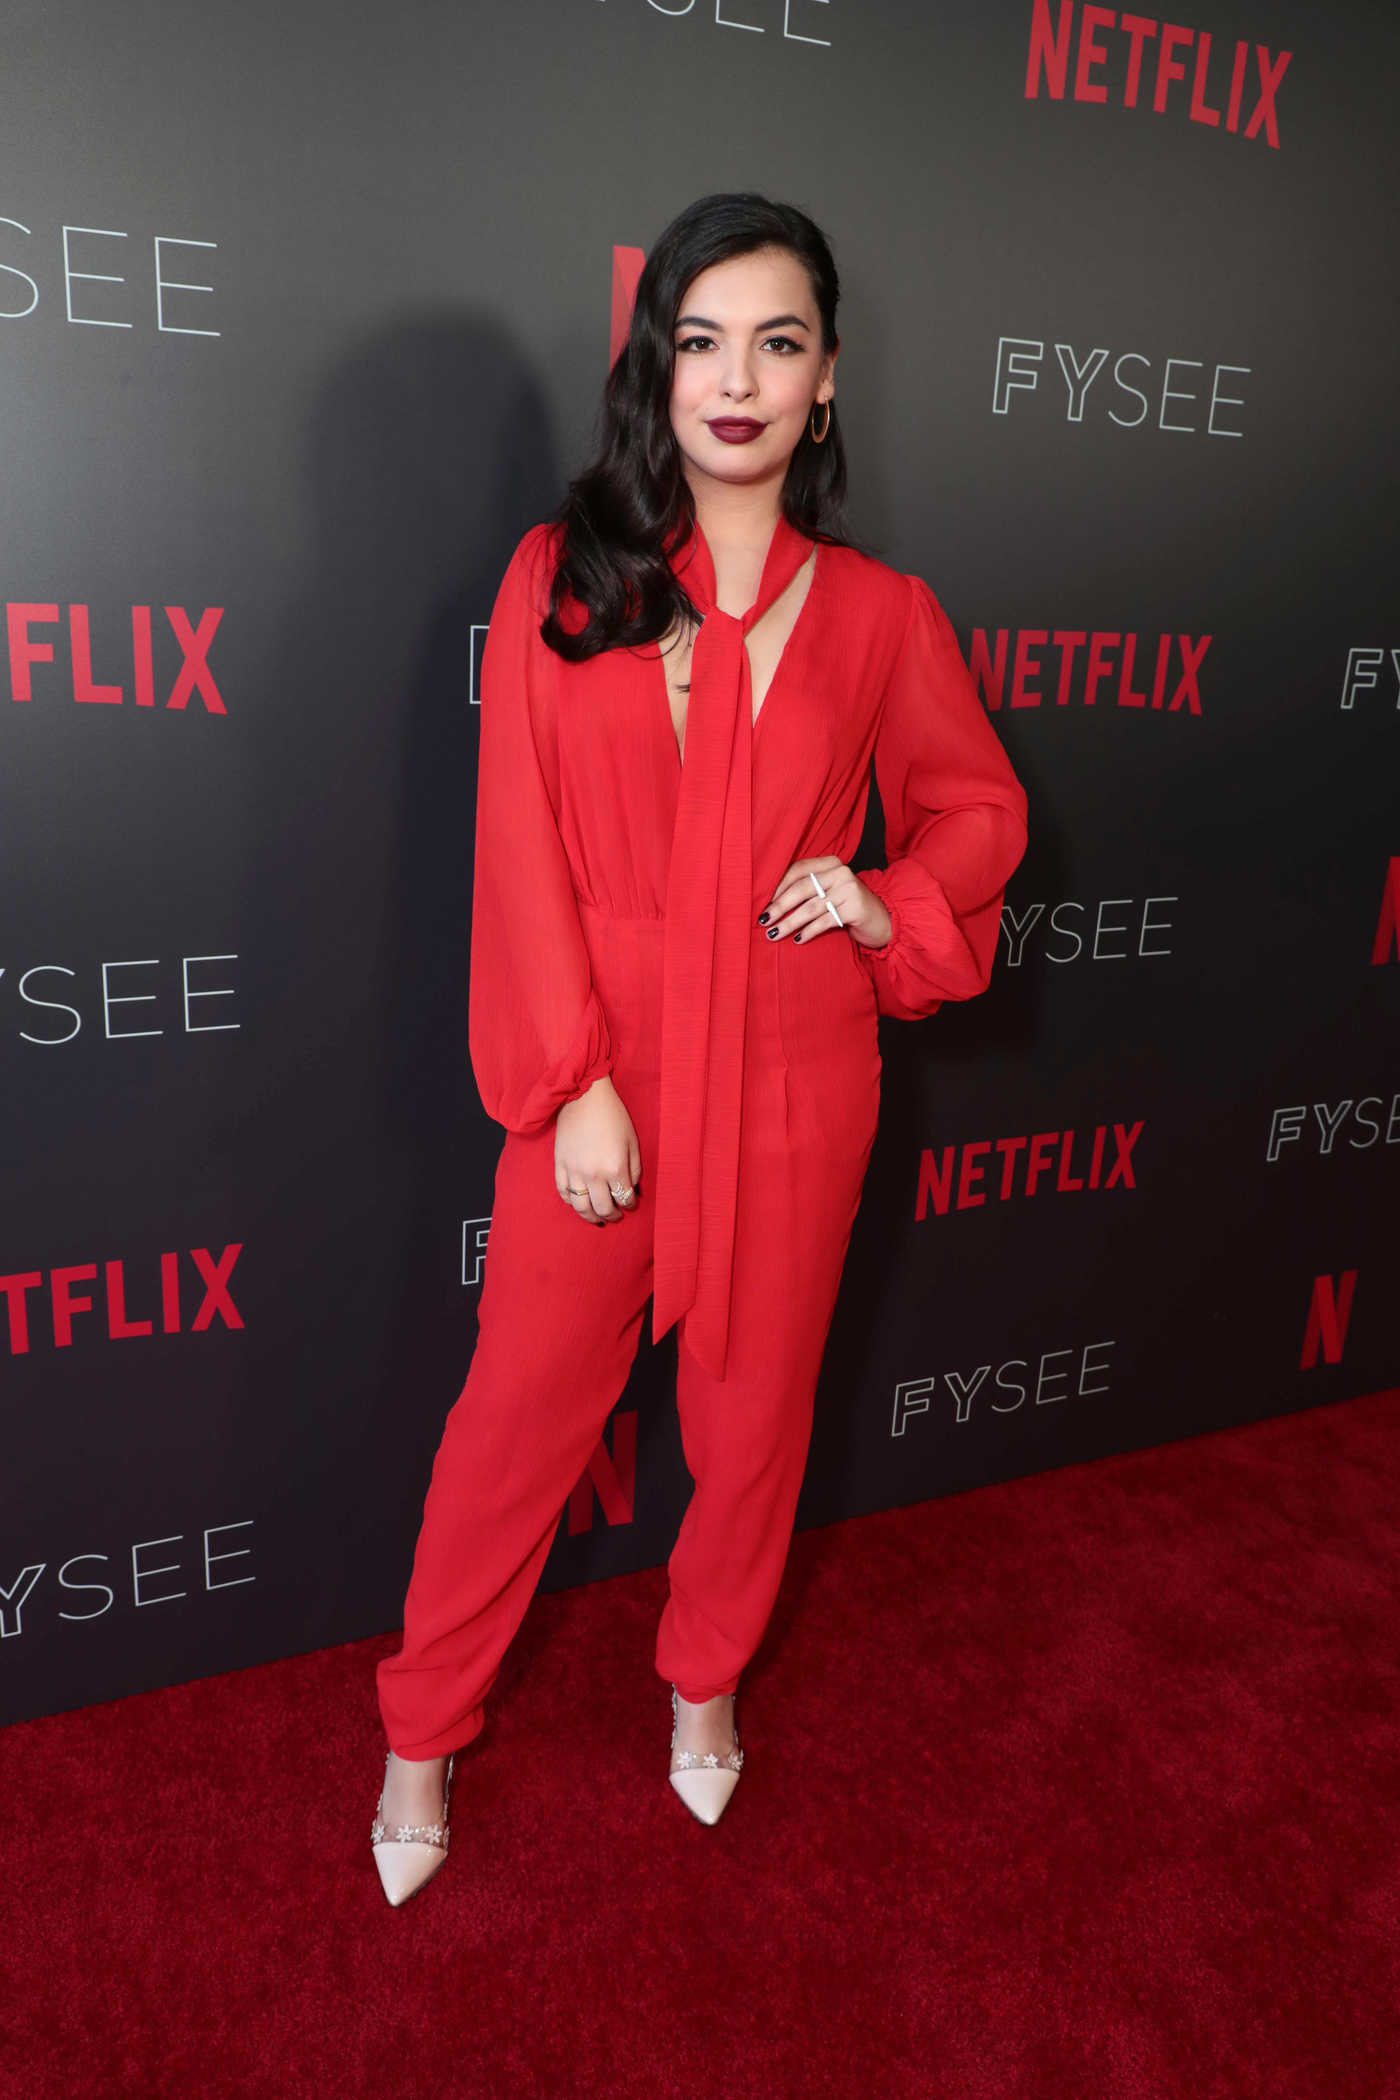 Isabella Gomez at Netflix FYSee Event at a Time Panel in Los Angeles 02/06/2018